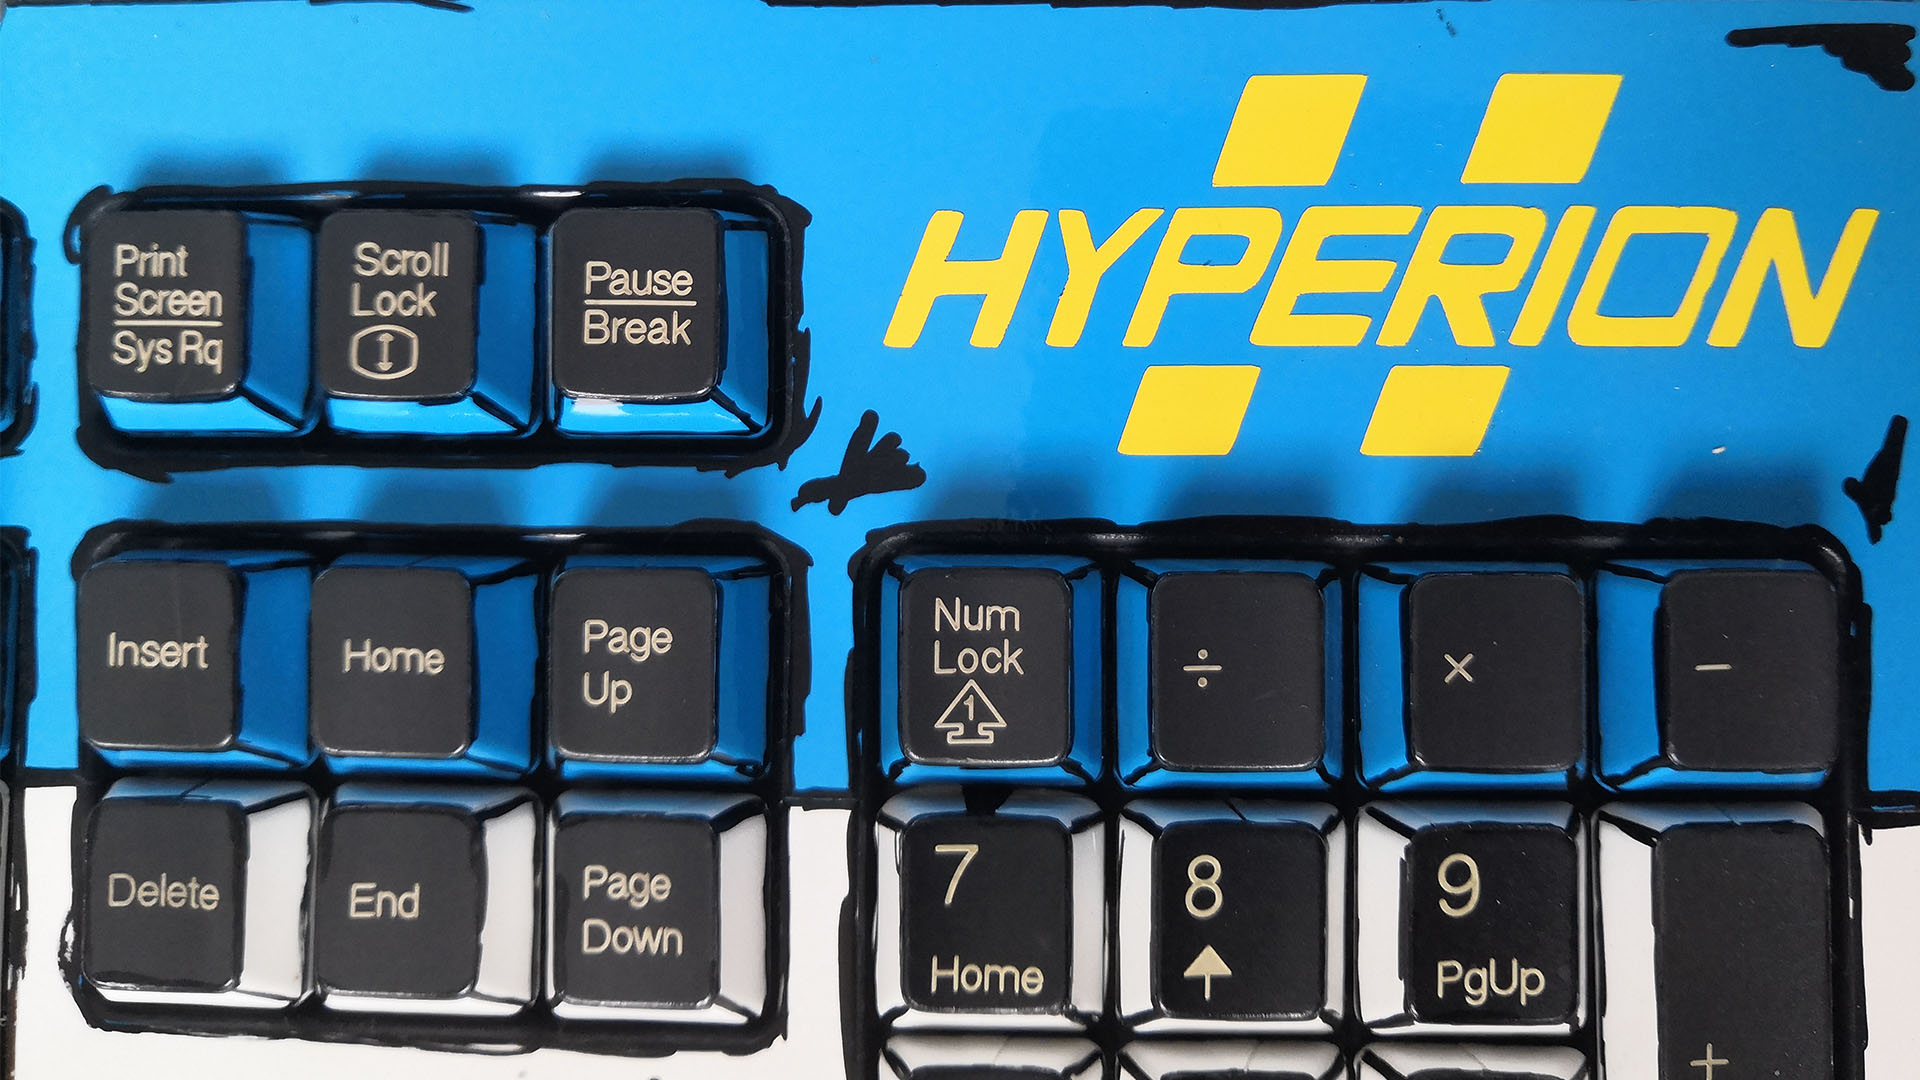 A vinyl-wrapped keyboard that looks like Borderlands cel-shading